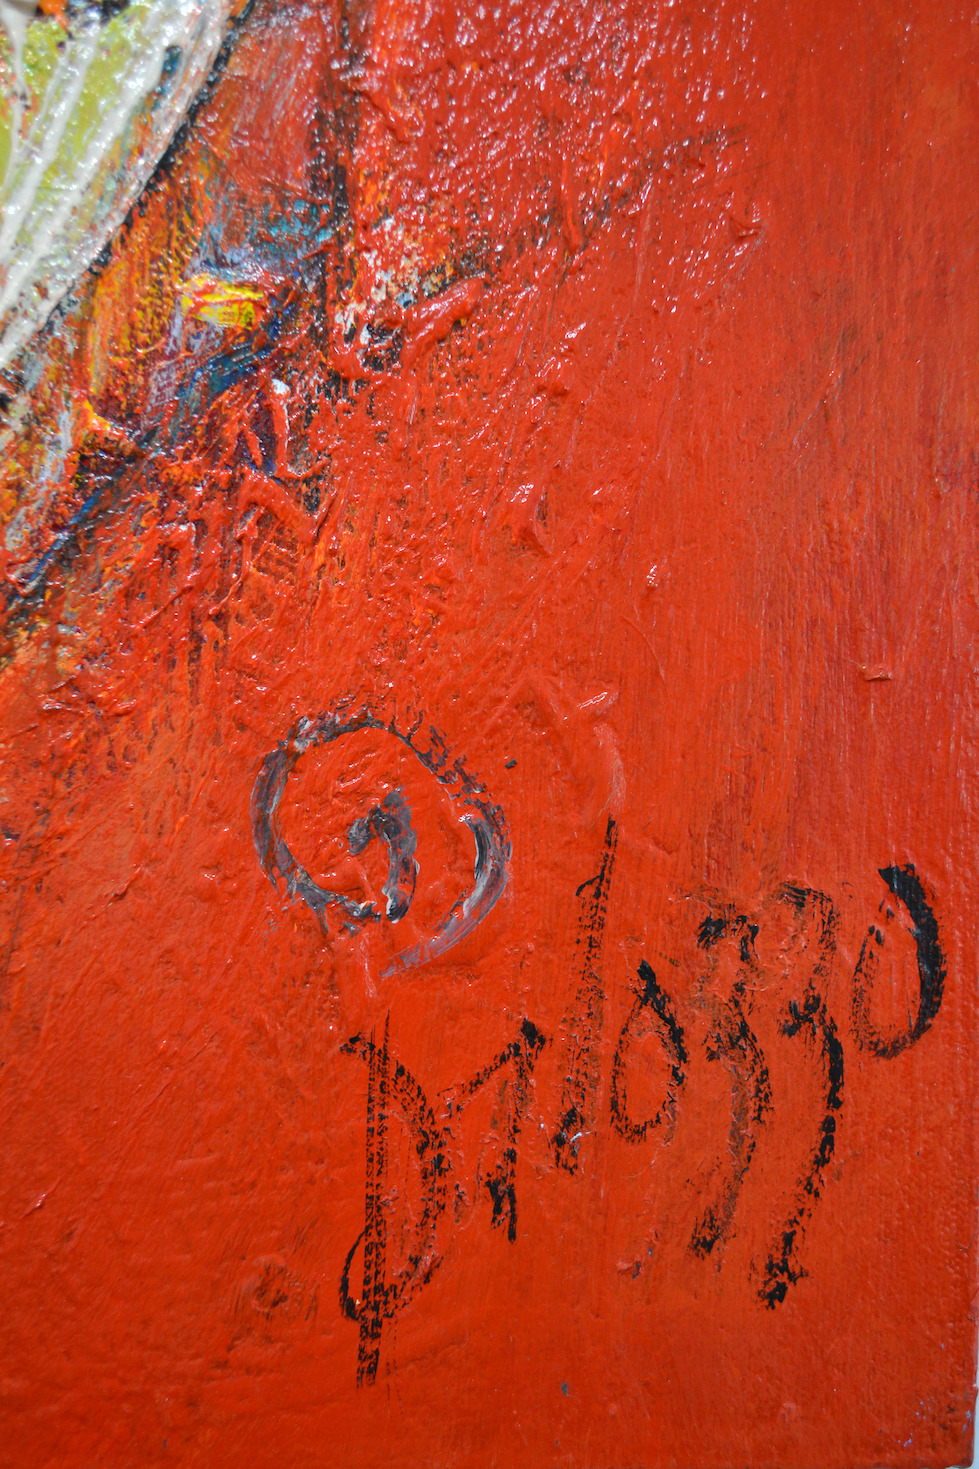 Close Up Signature Of Acrylic Painting "Melody 3" By Lucette Dalozzo